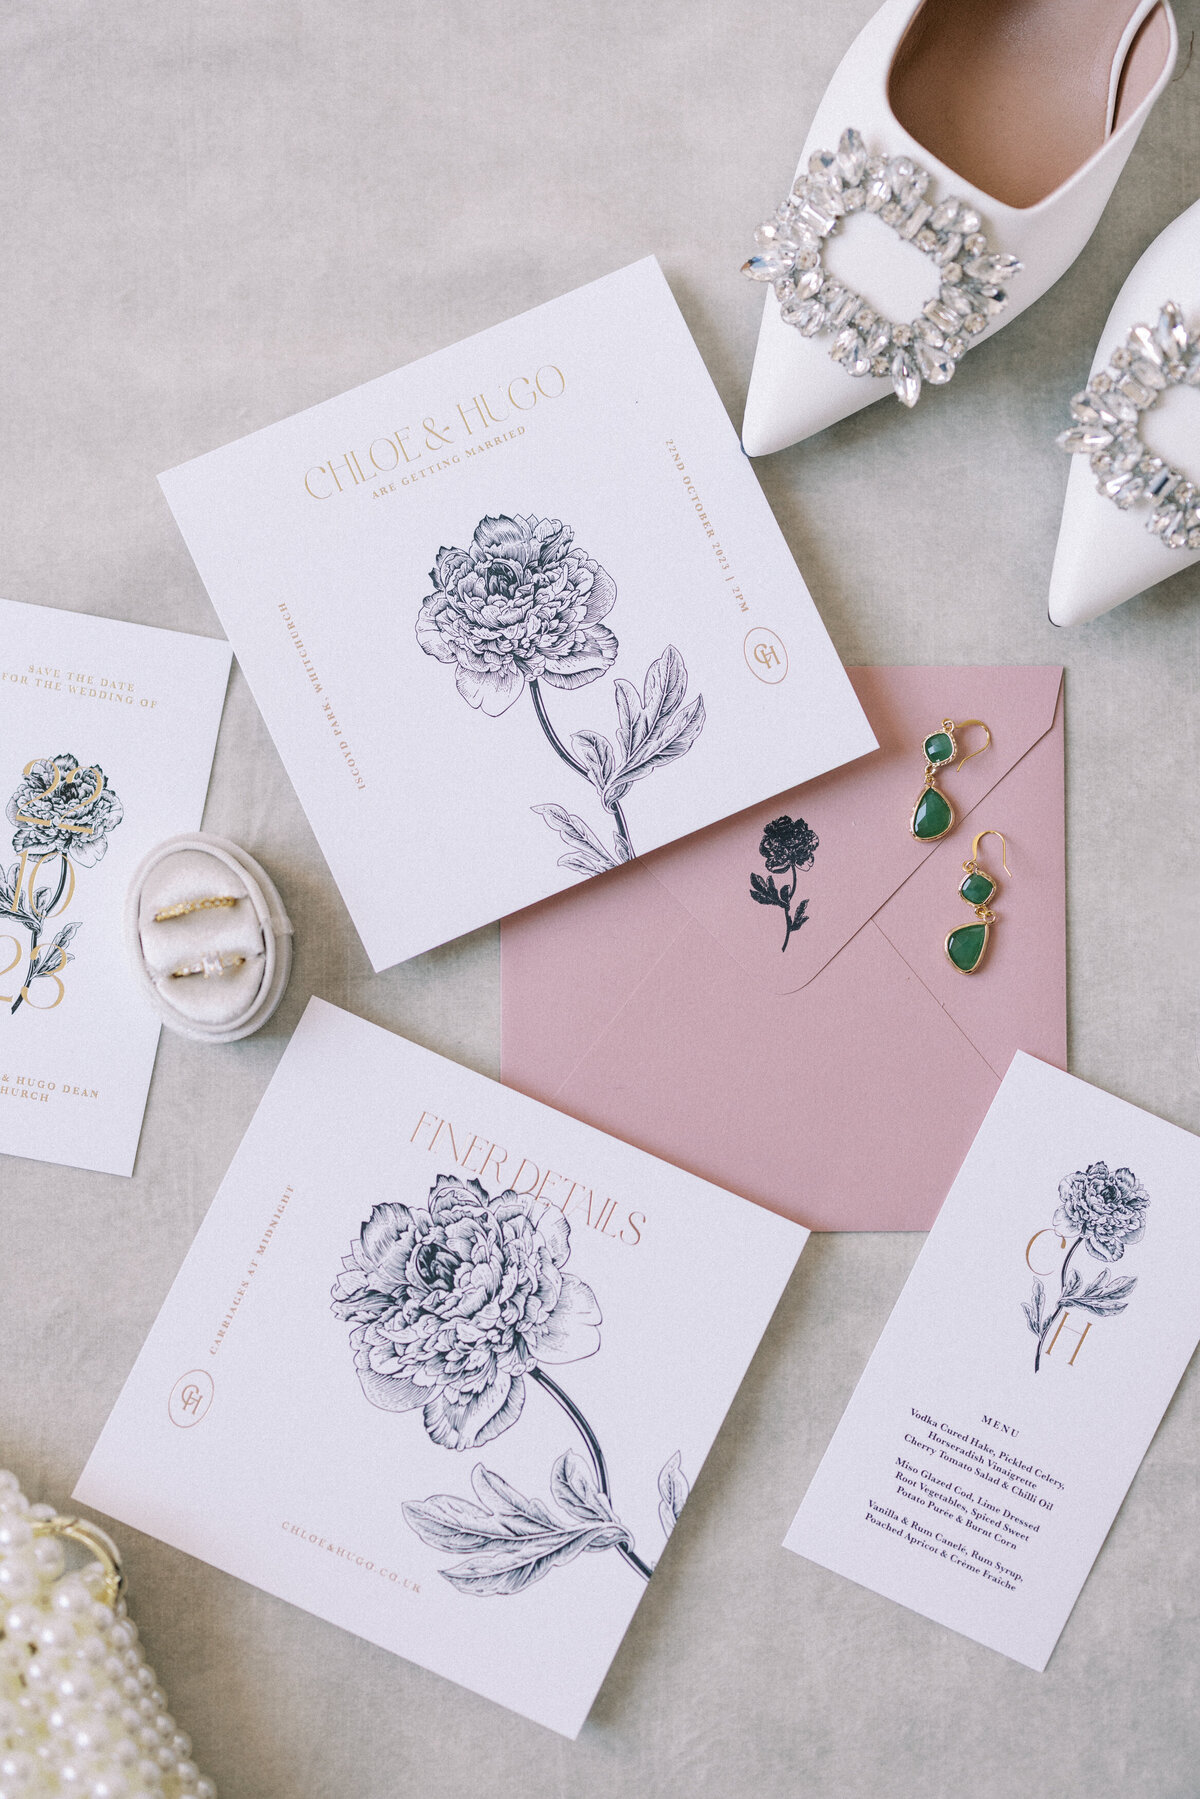 Flat lay photograph of wedding day stationery and details